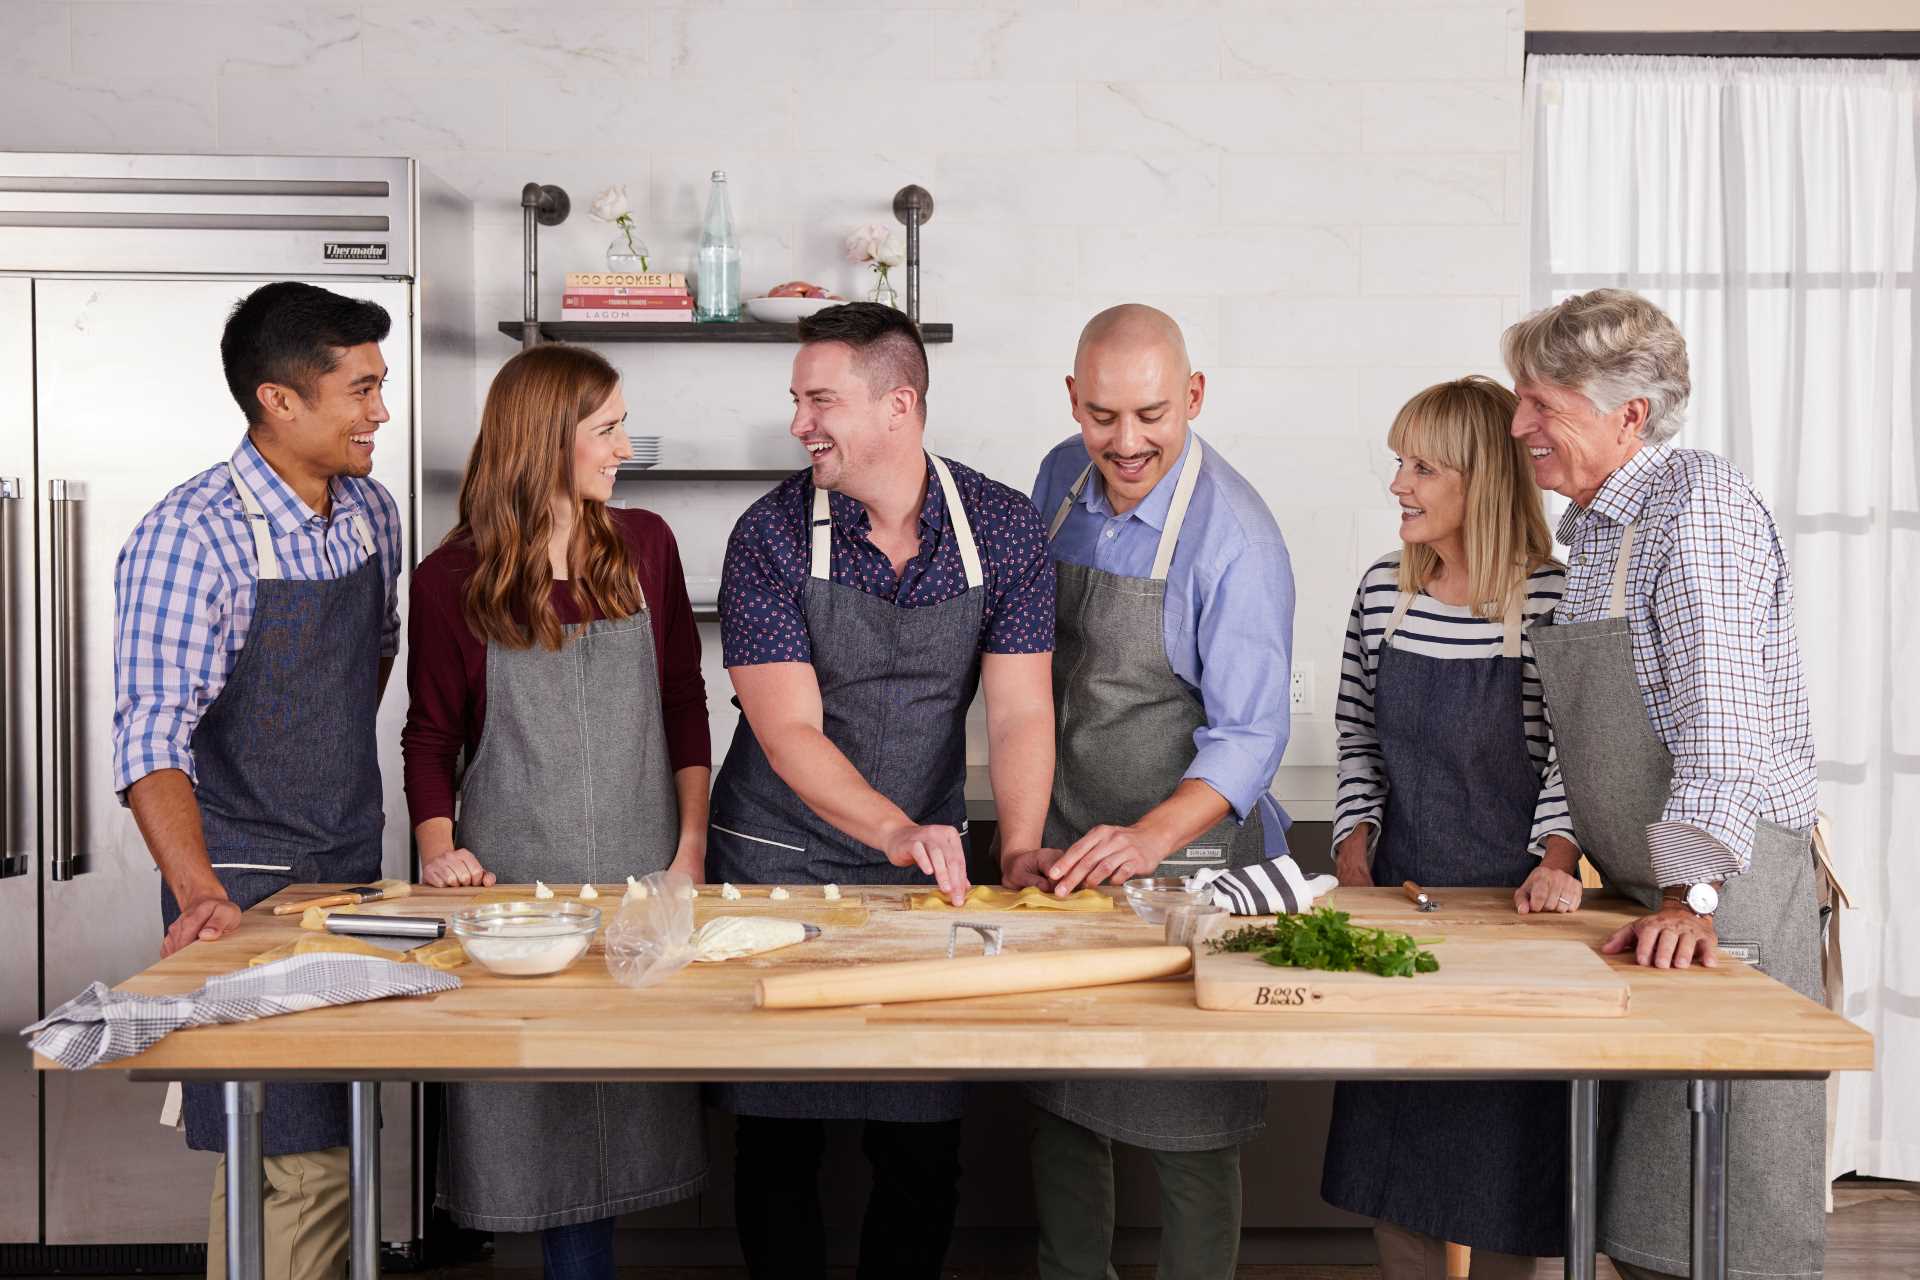 7 Sur La Table Cooking Classes To Level Up Your Holiday Hosting